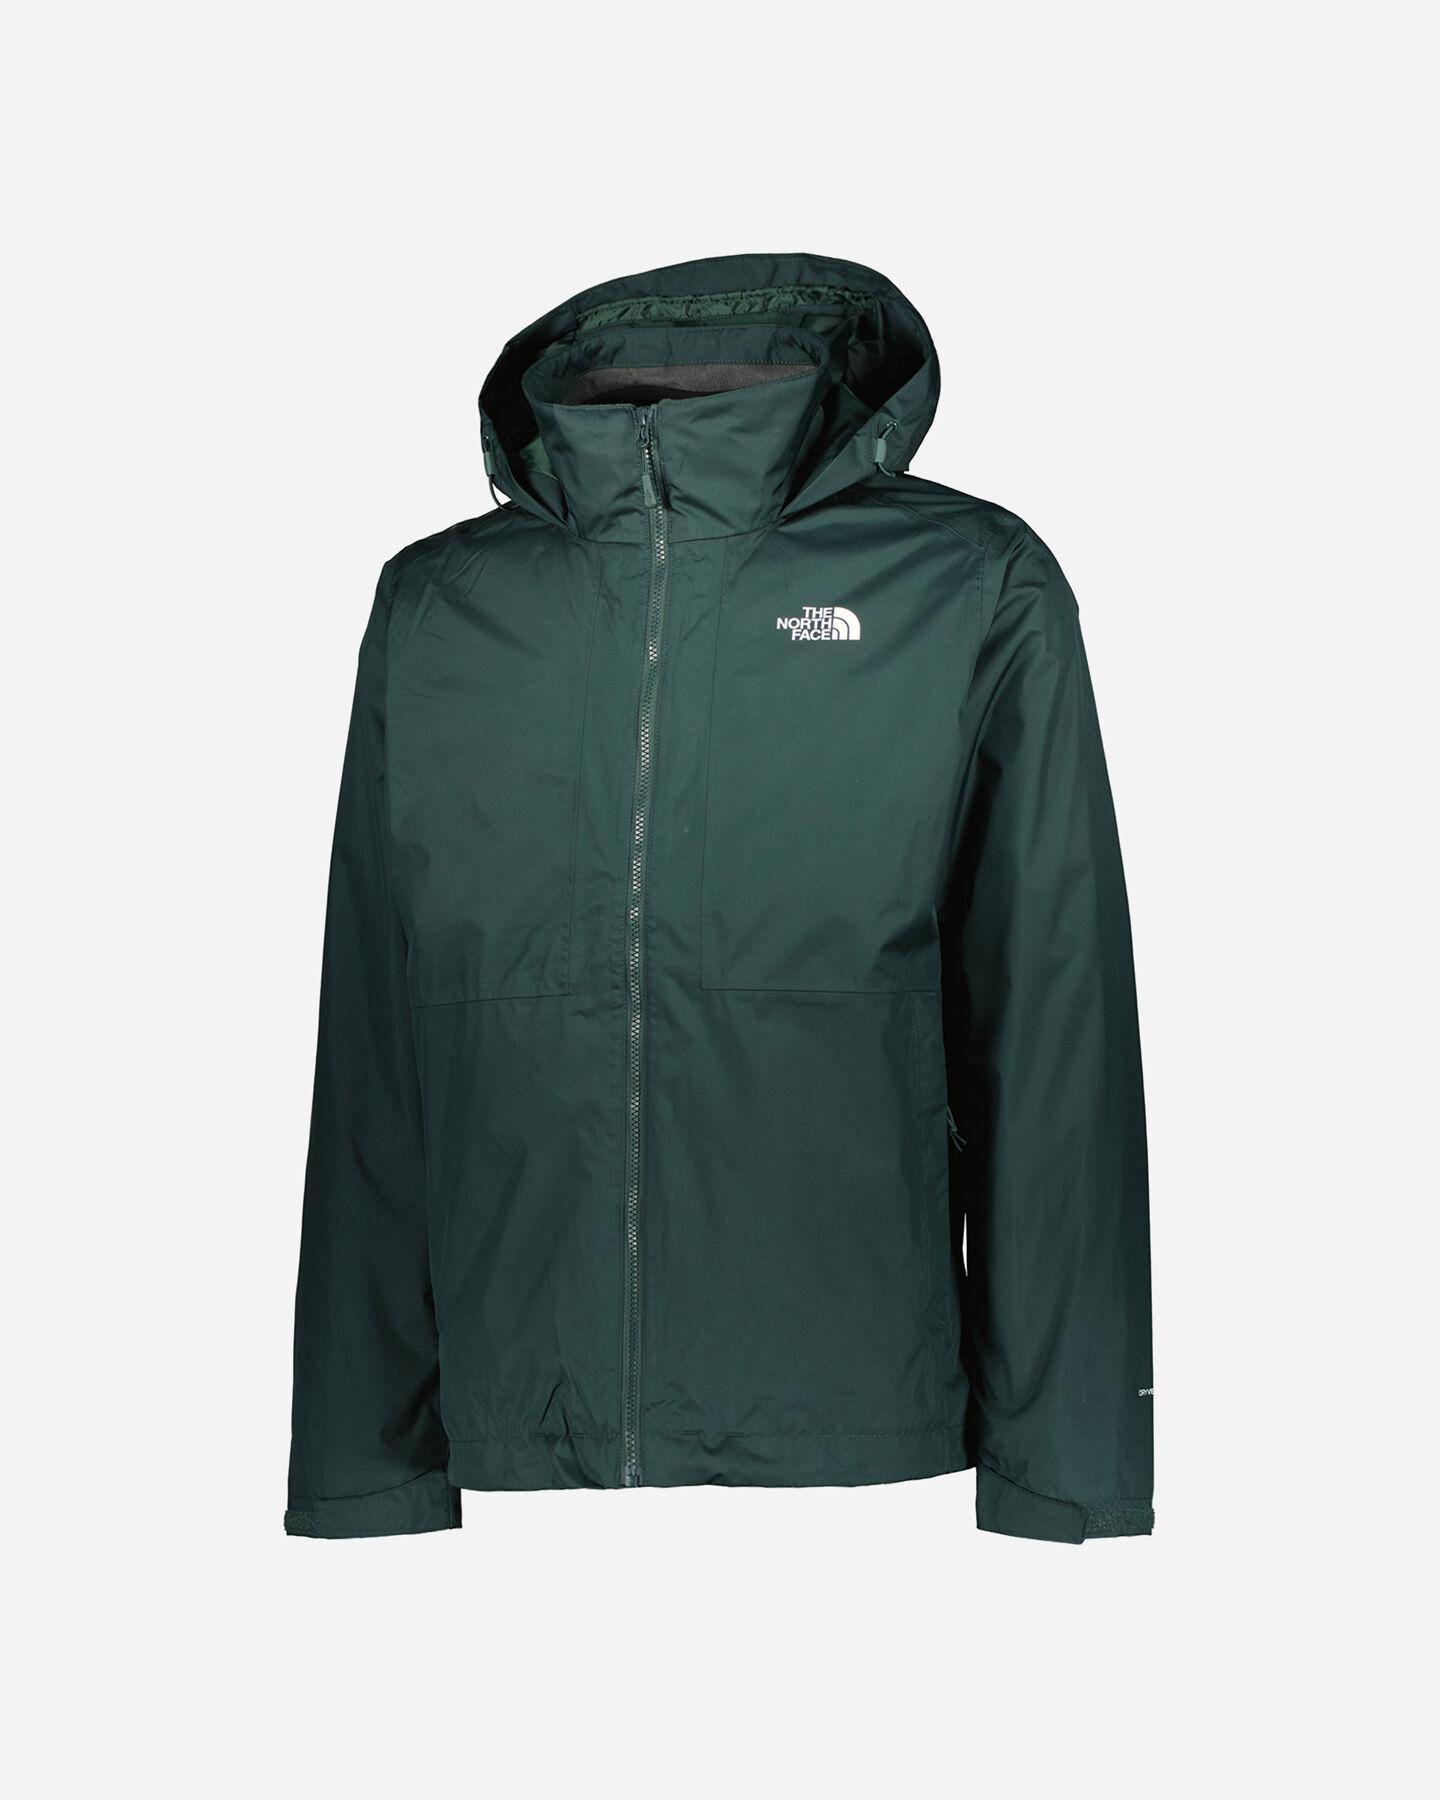  Giacca outdoor THE NORTH FACE ARASHI II DK SAGE TRICLIMATE M S5347145|D0R|S scatto 0